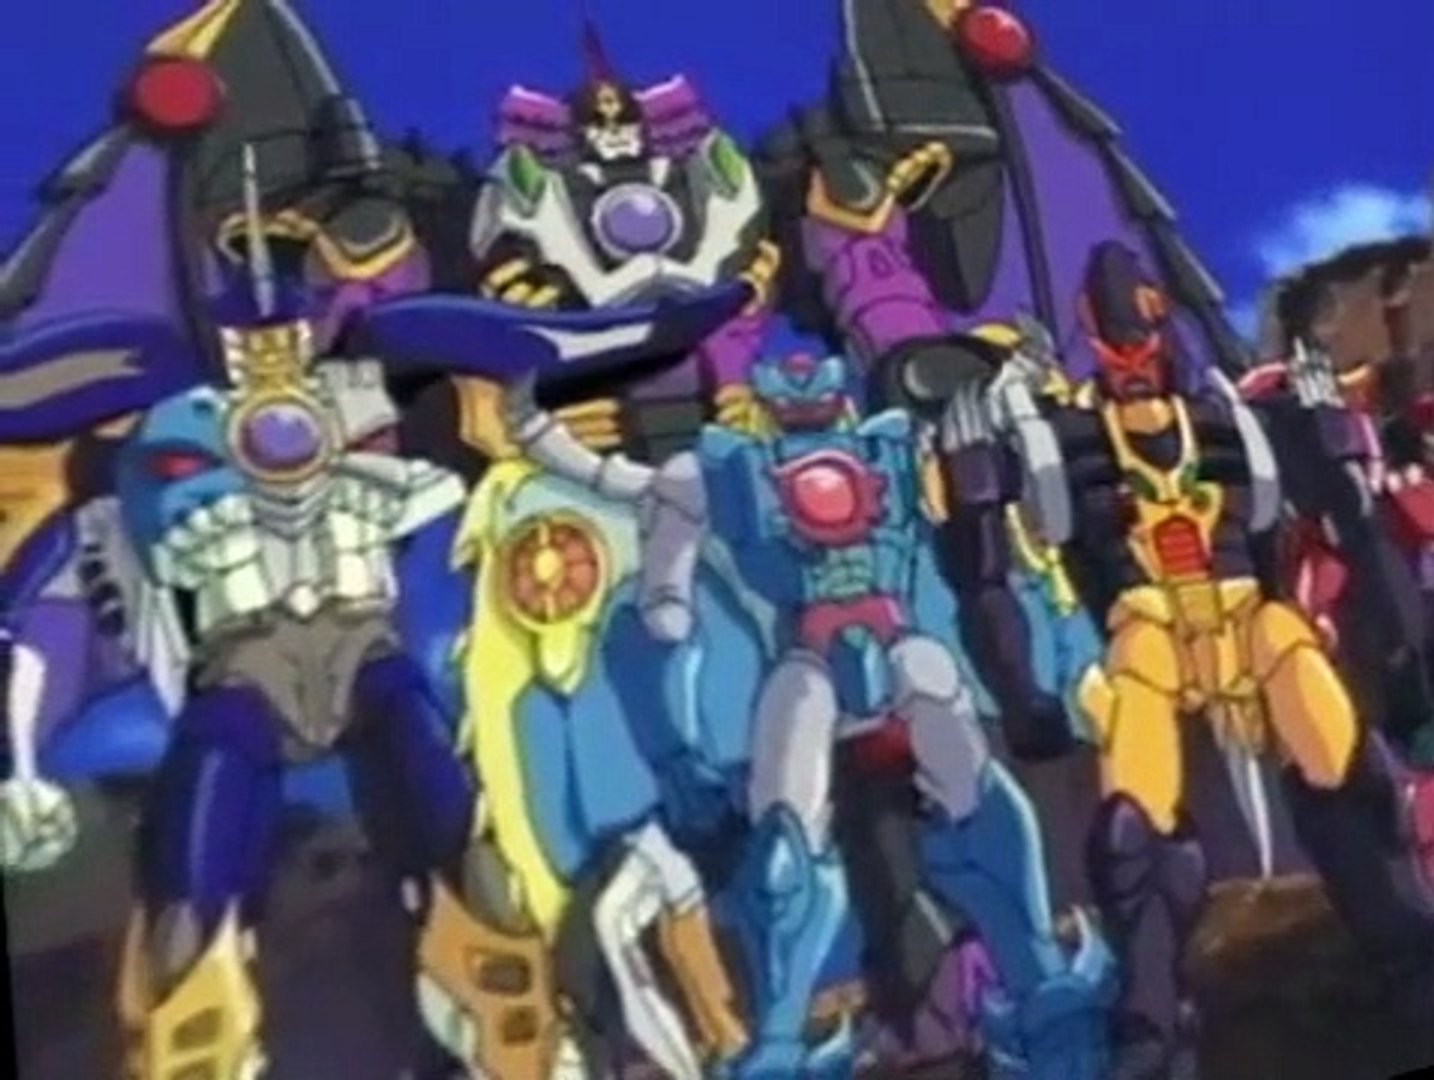 Transformers: Robots in Disguise (2001 cartoon) - Transformers Wiki